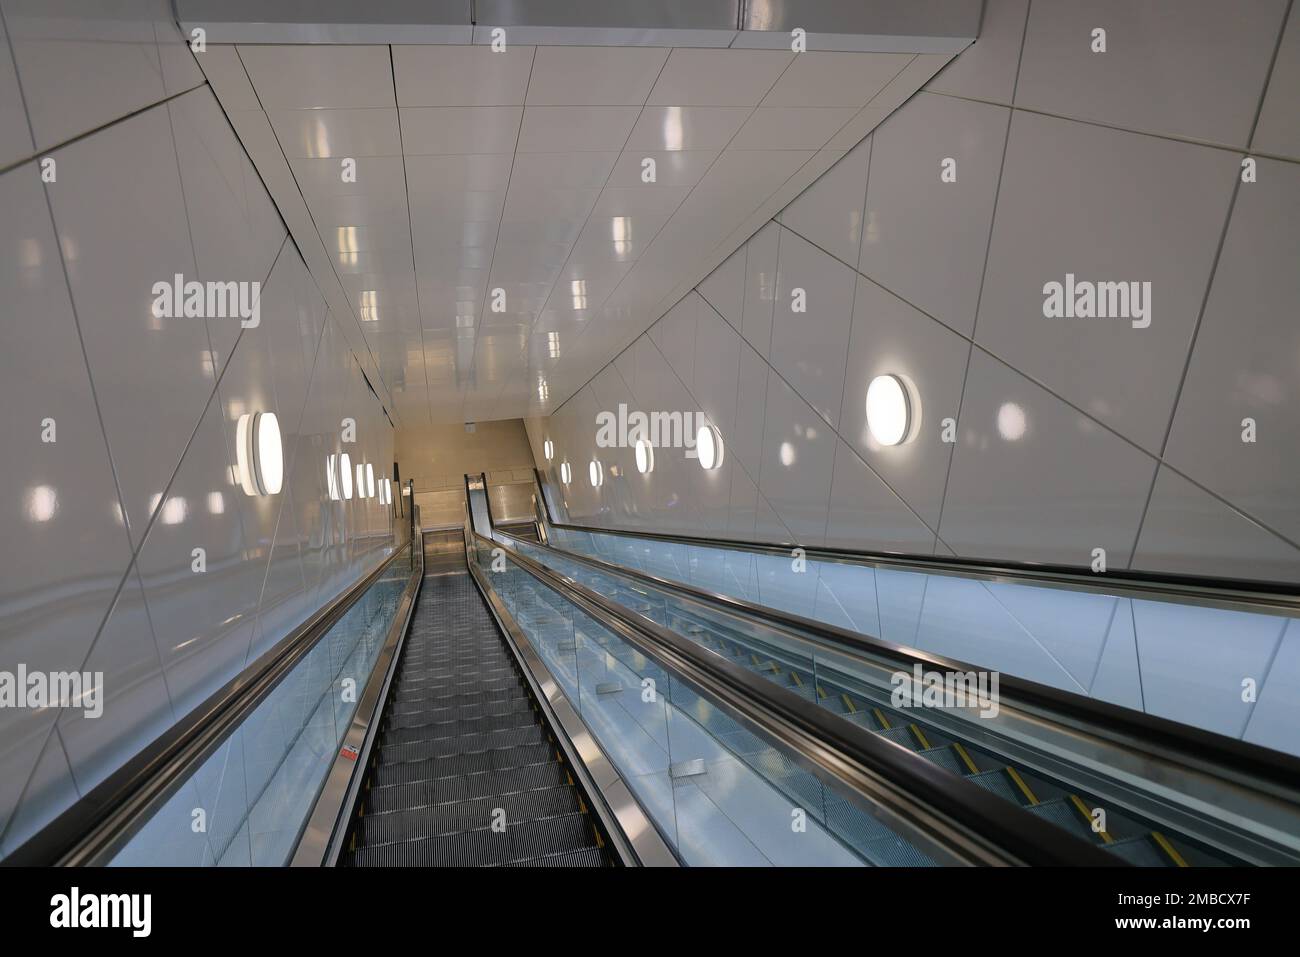 Escalator in modern buildings or subway station, escalator in a shopping center. Automatic escalator in the subway. Stock Photo